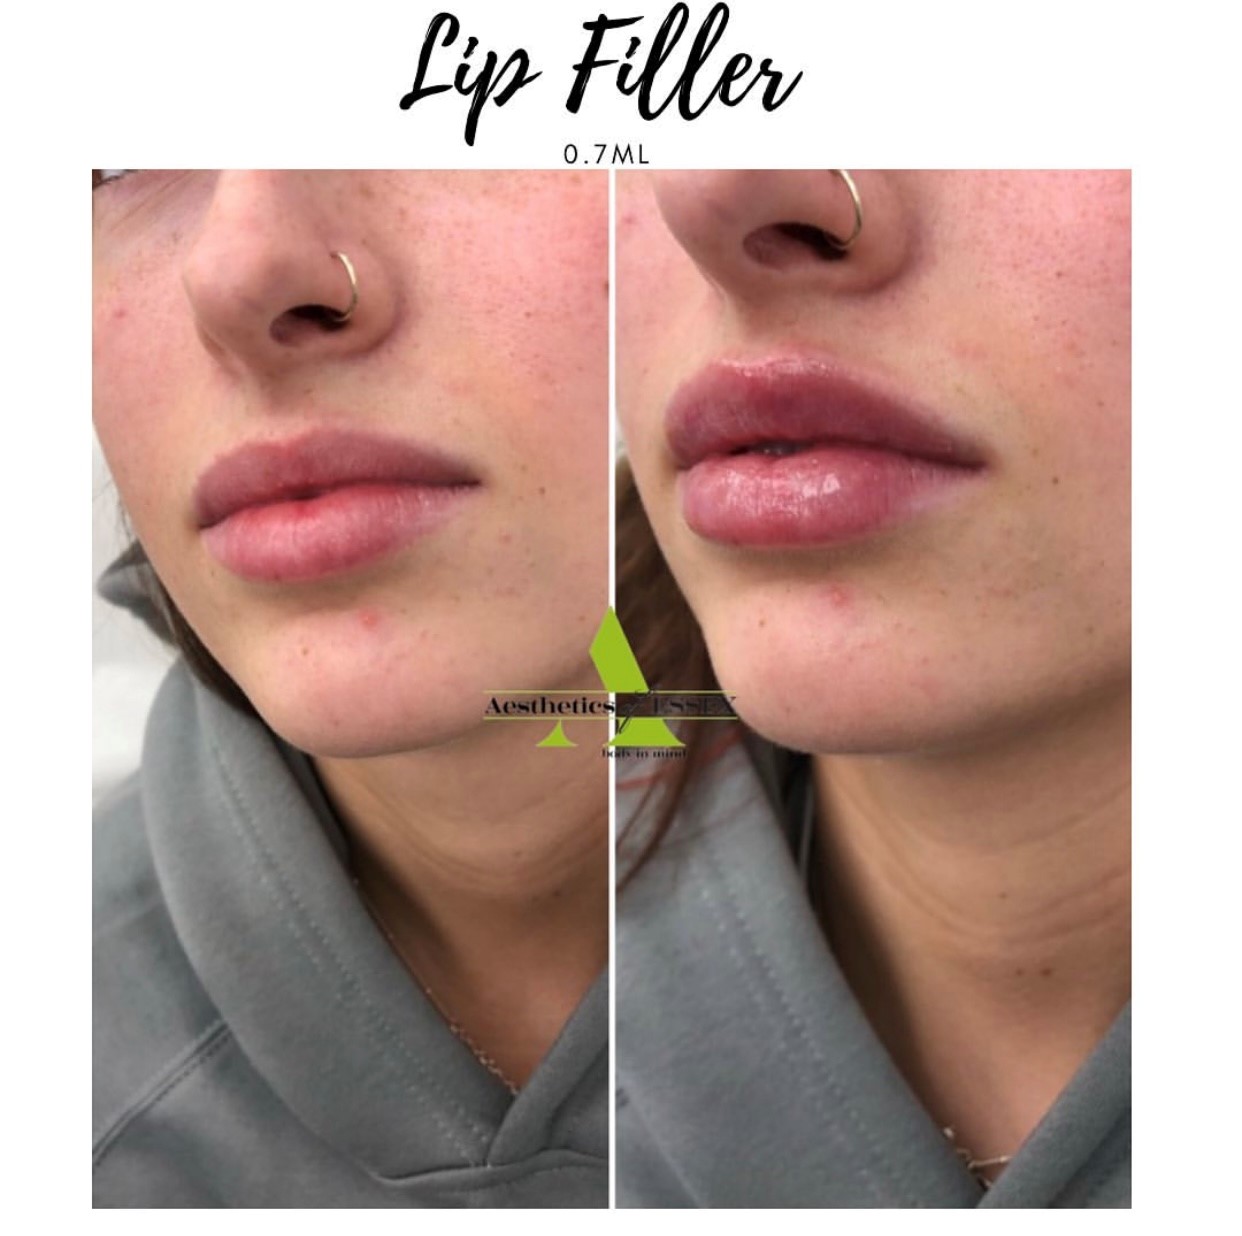 Before and after Lip filler